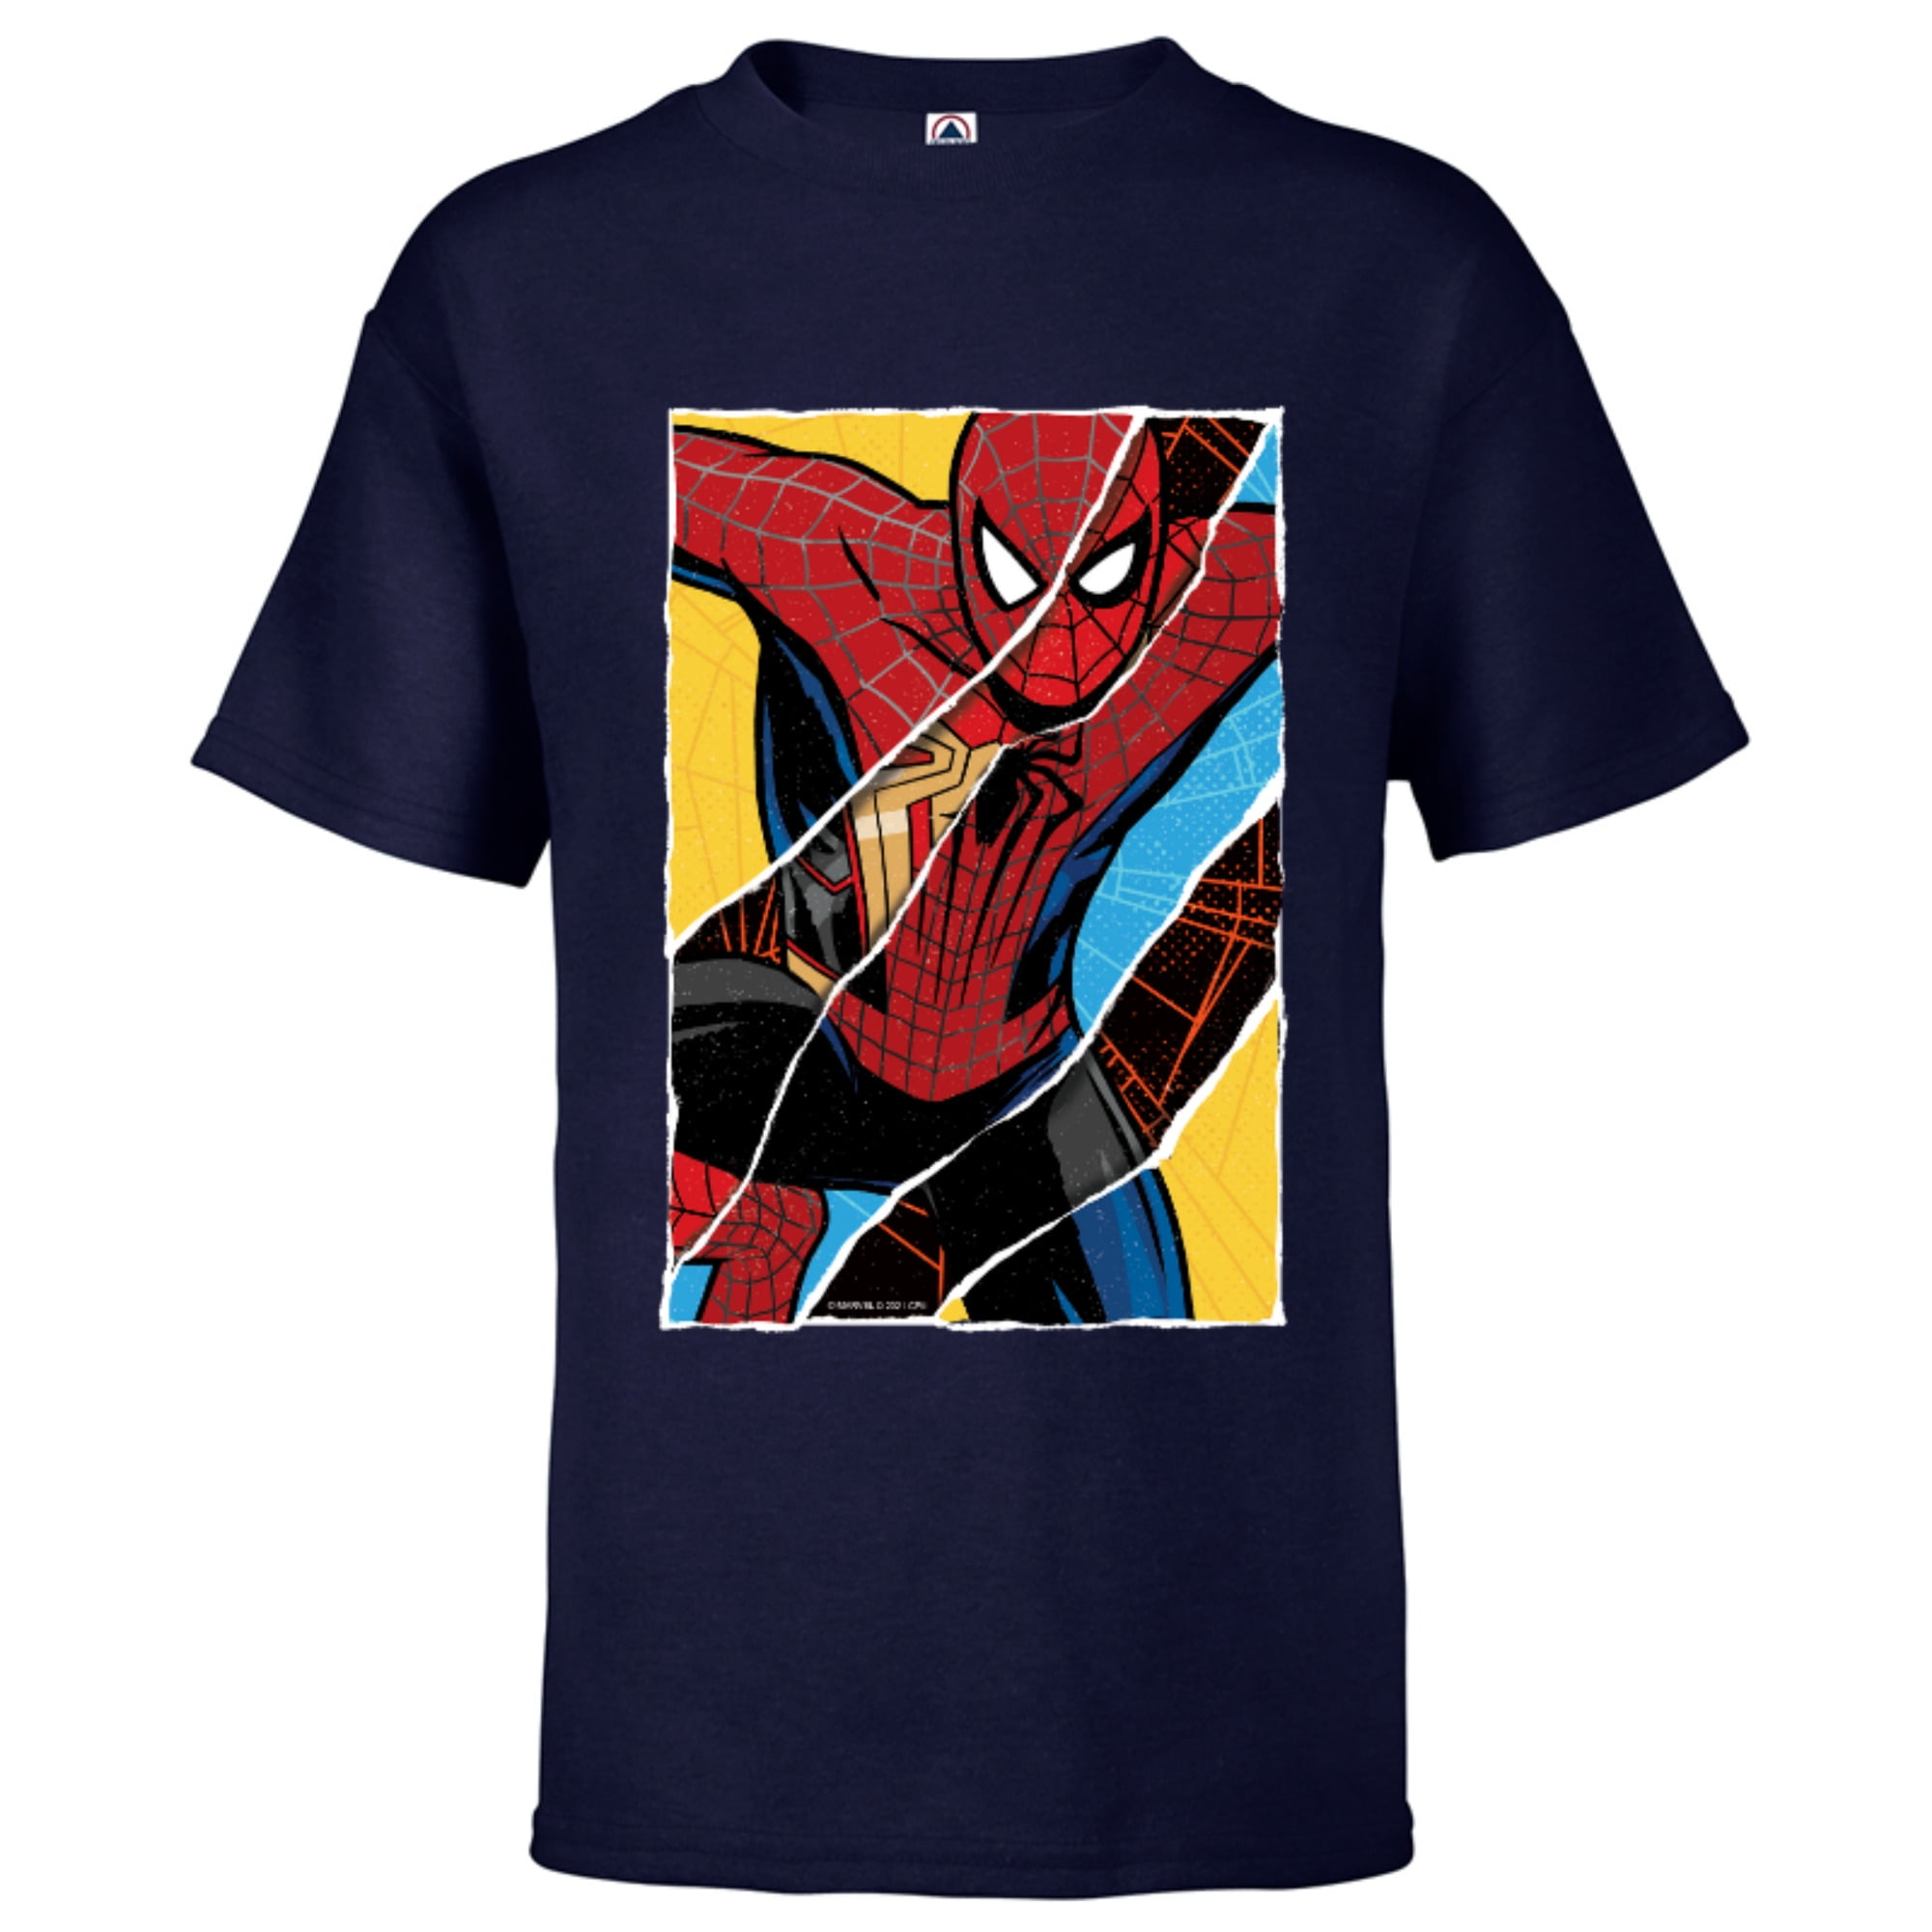 for - - Comic No Spider-Man: Short Spider-Men Marvel Sleeve Kids T-Shirt Home Customized-Black Collage Way